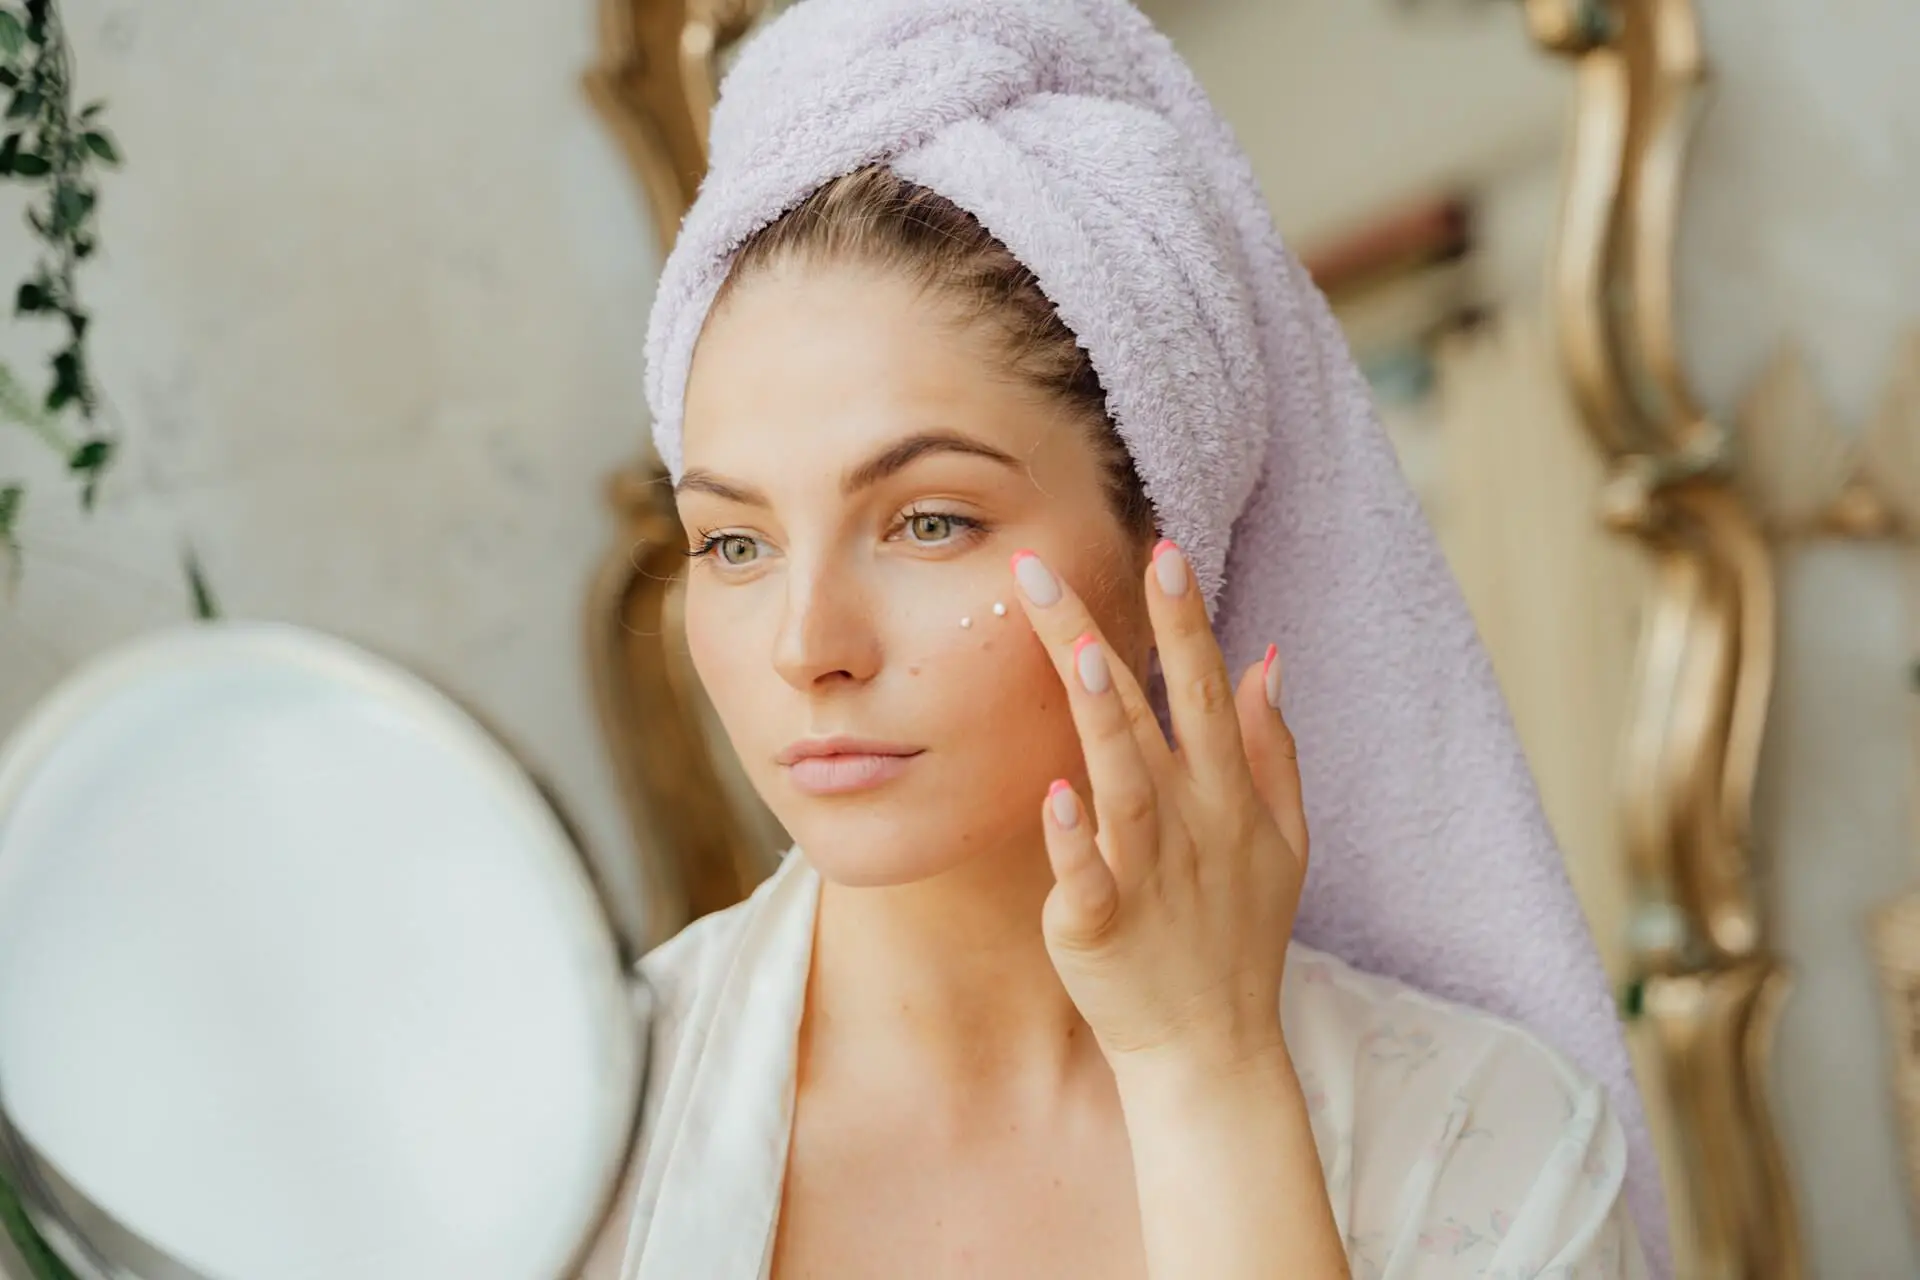 Things You Need To Know Before Getting Skincare Consultation